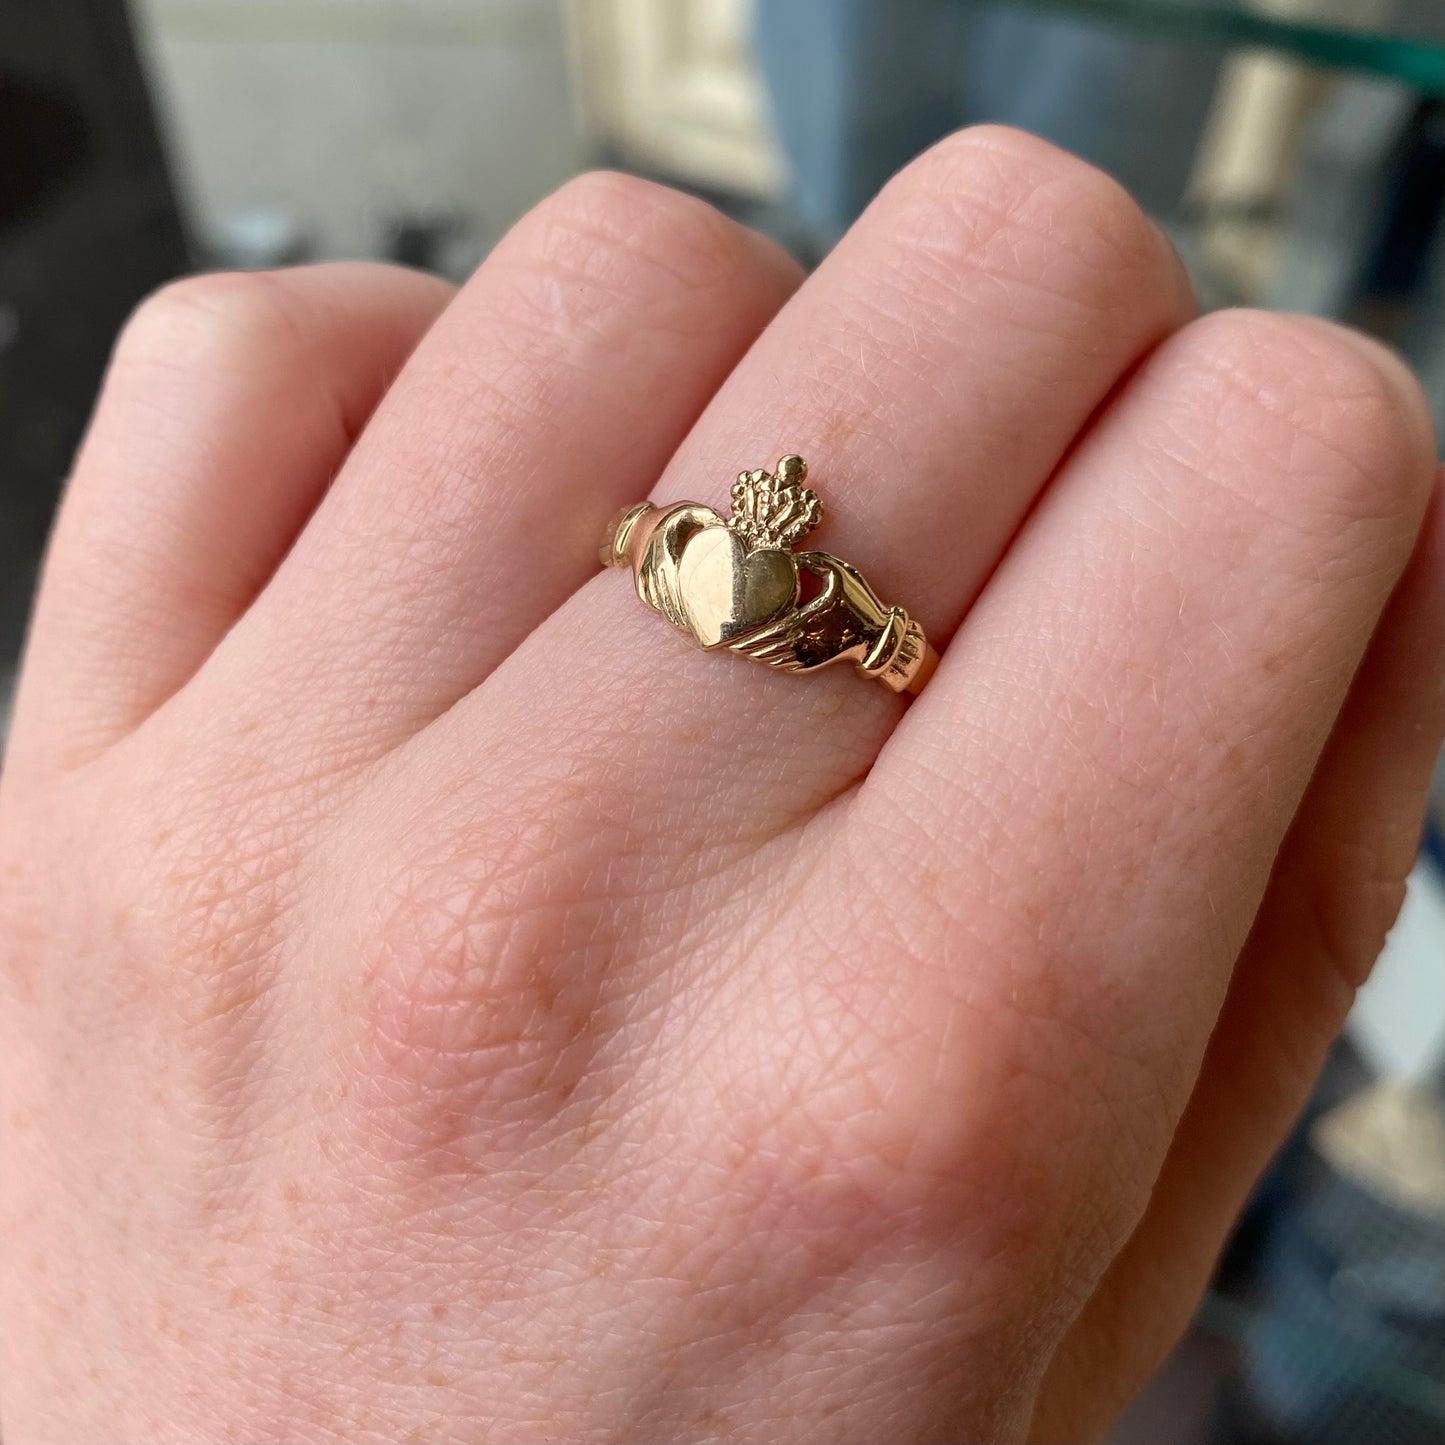 9ct Gold Claddagh Ring - John Ross Jewellers